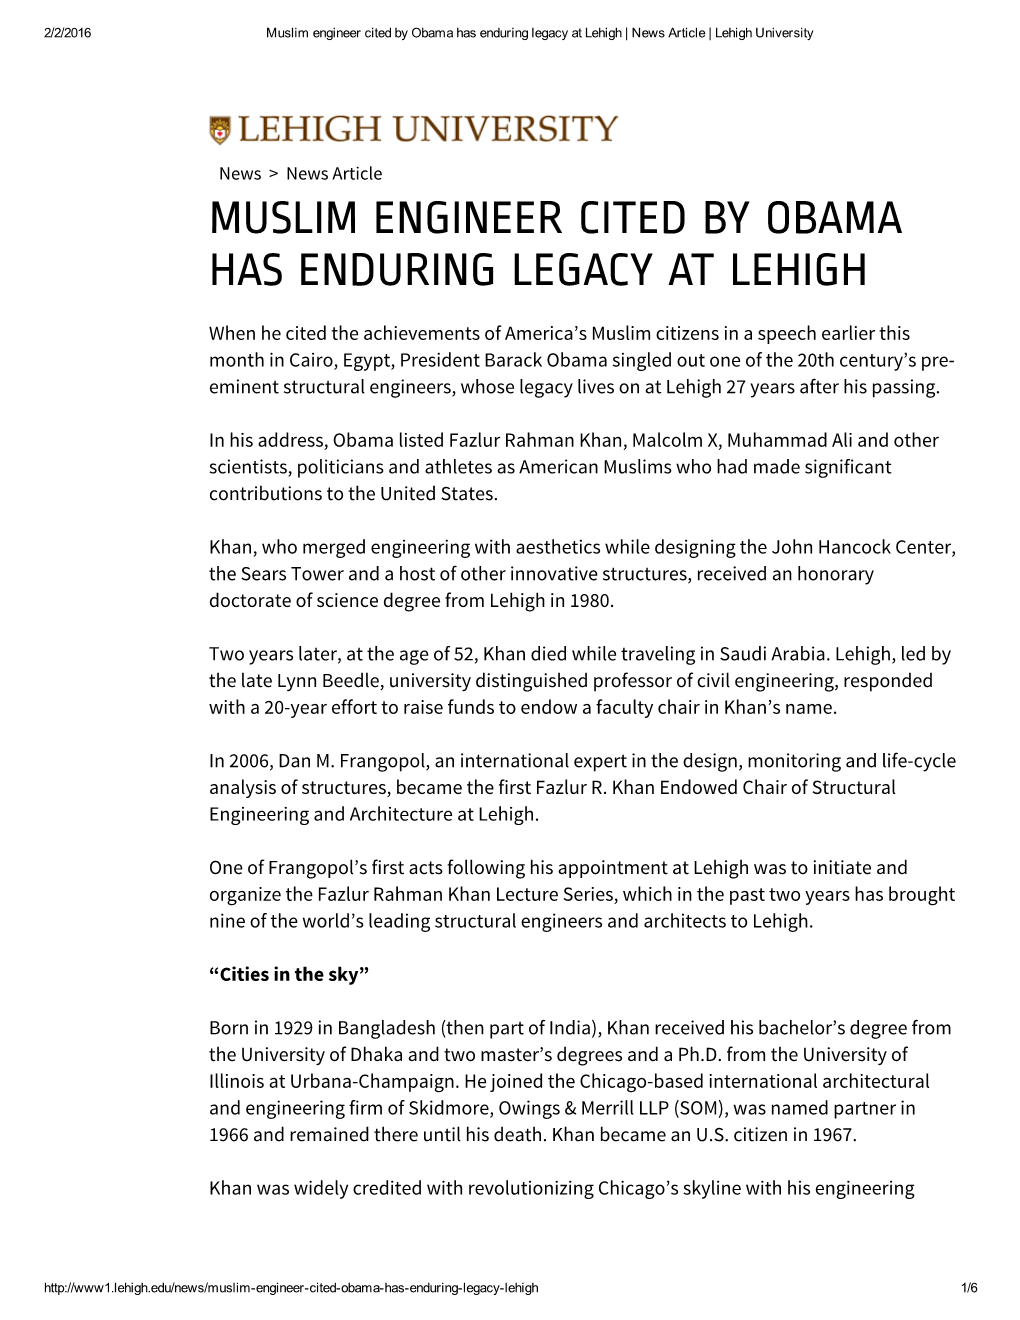 Muslim Engineer Cited by Obama Has Enduring Legacy at Lehigh | News Article | Lehigh University